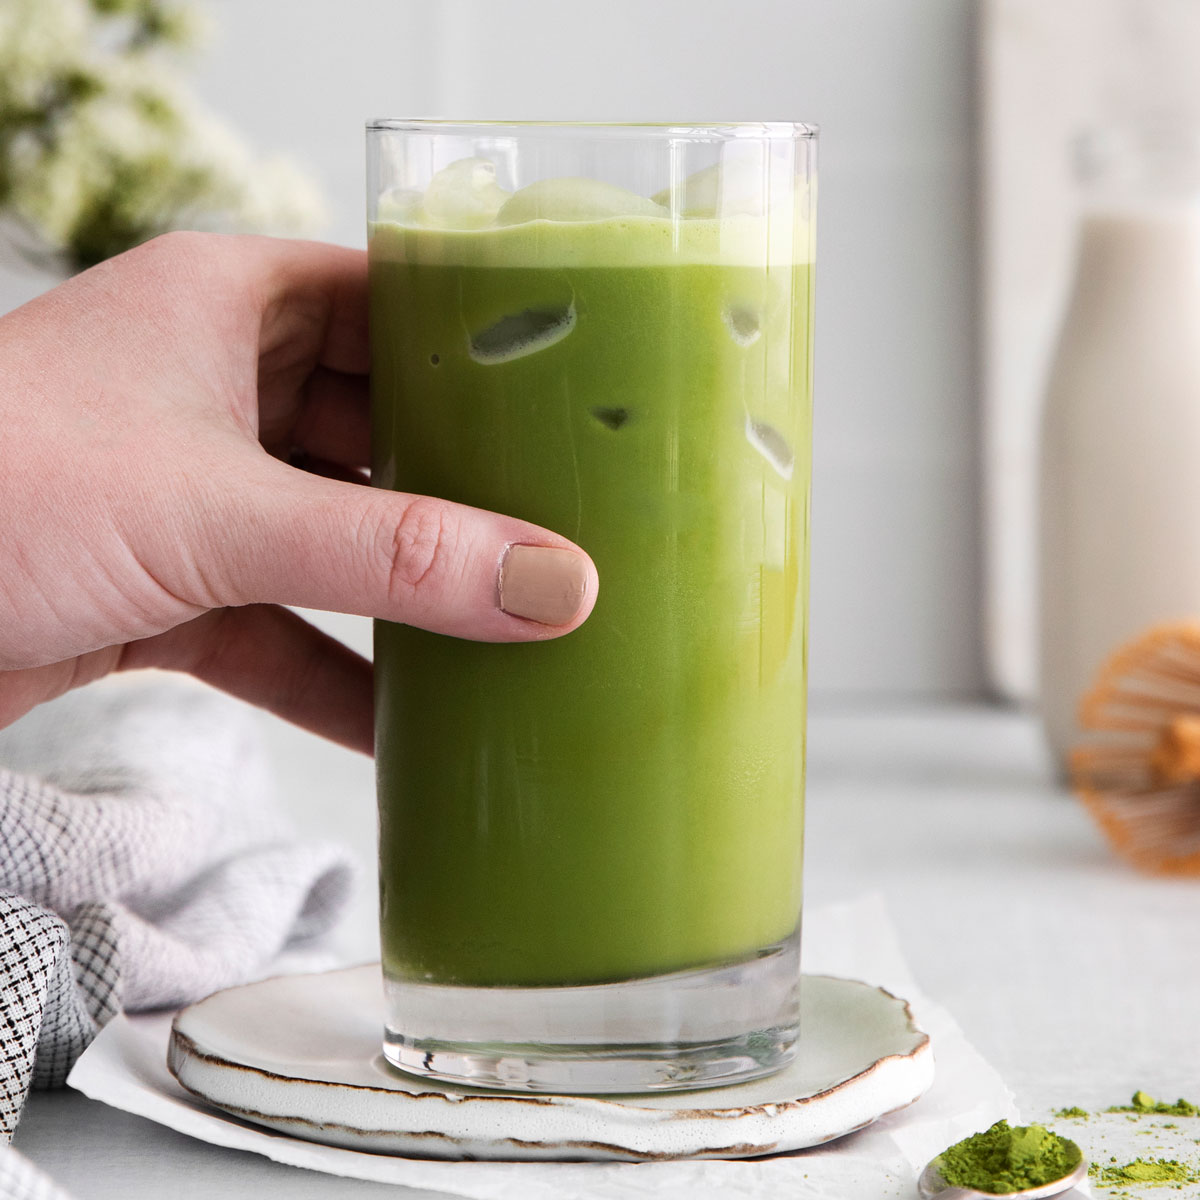 Starbucks' Matcha Drinks Are A Great Alternative To Coffee